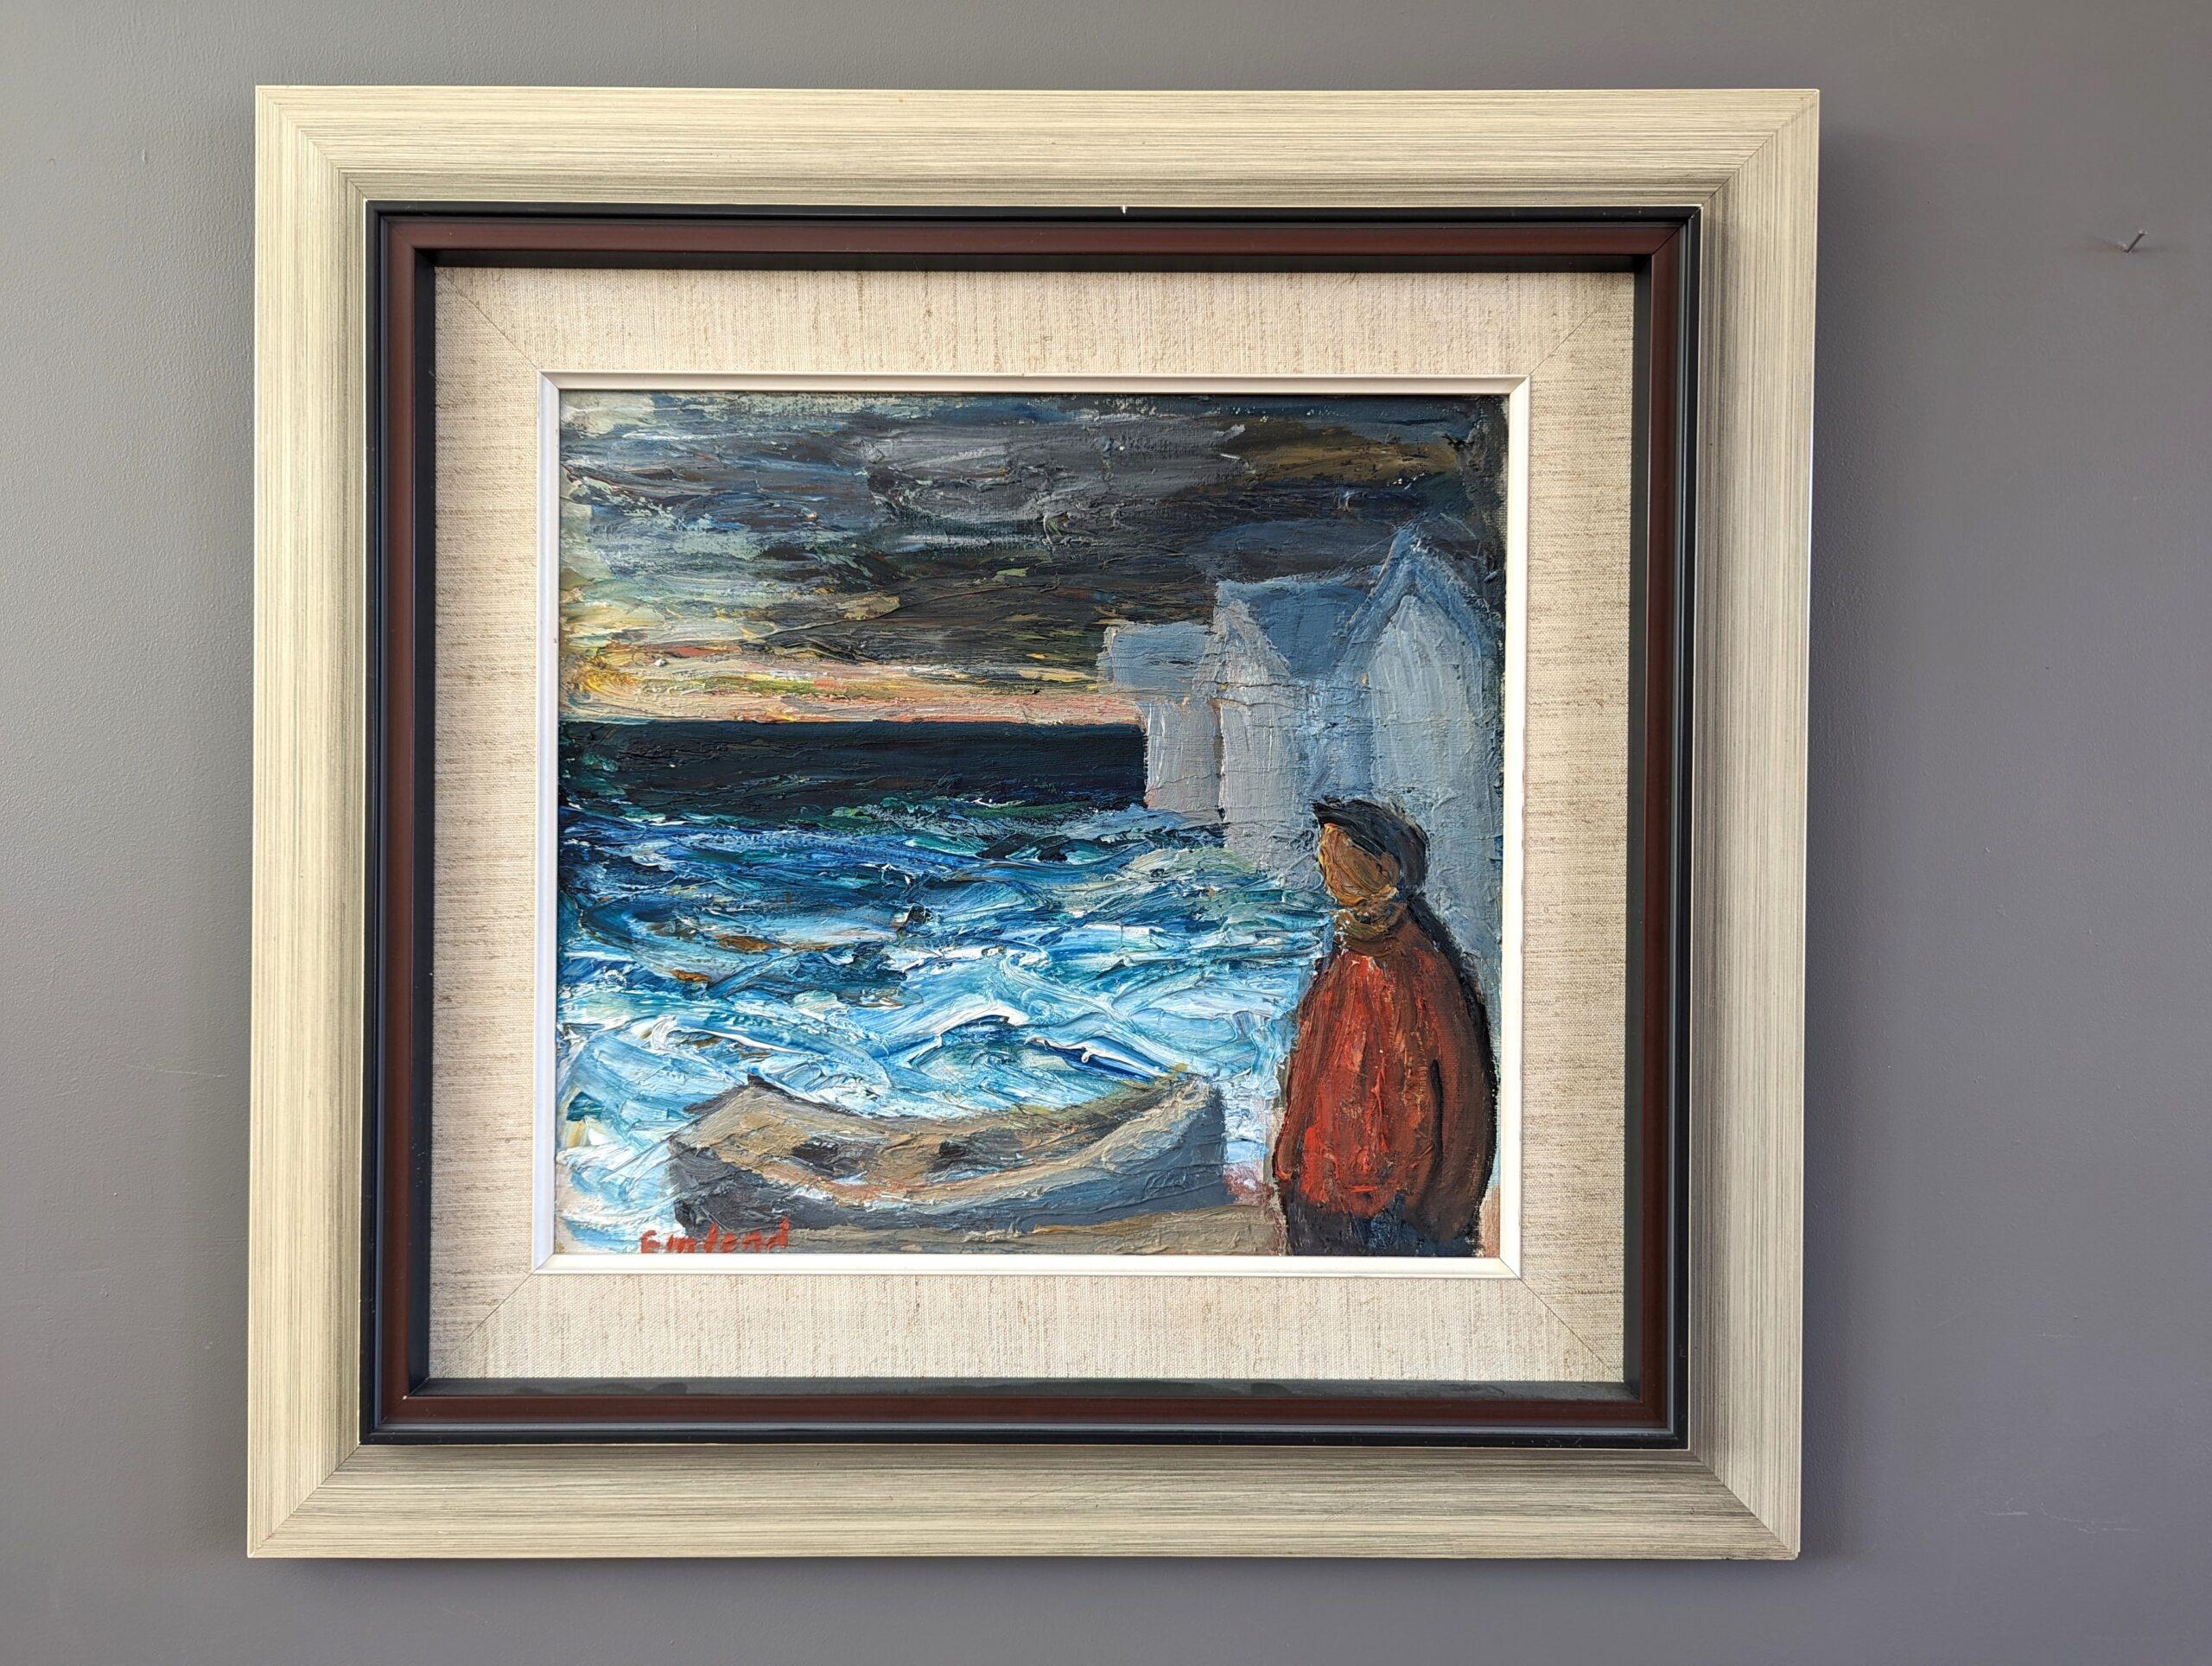 THOUGHTS BY THE SEA
Size: 53 x 56 cm (including frame)
Oil on Canvas

An expressive and beautifully textured mid-century seascape composition, painted in oil onto canvas.

Executed in rich colours and confident brushstrokes, this artwork depicts a